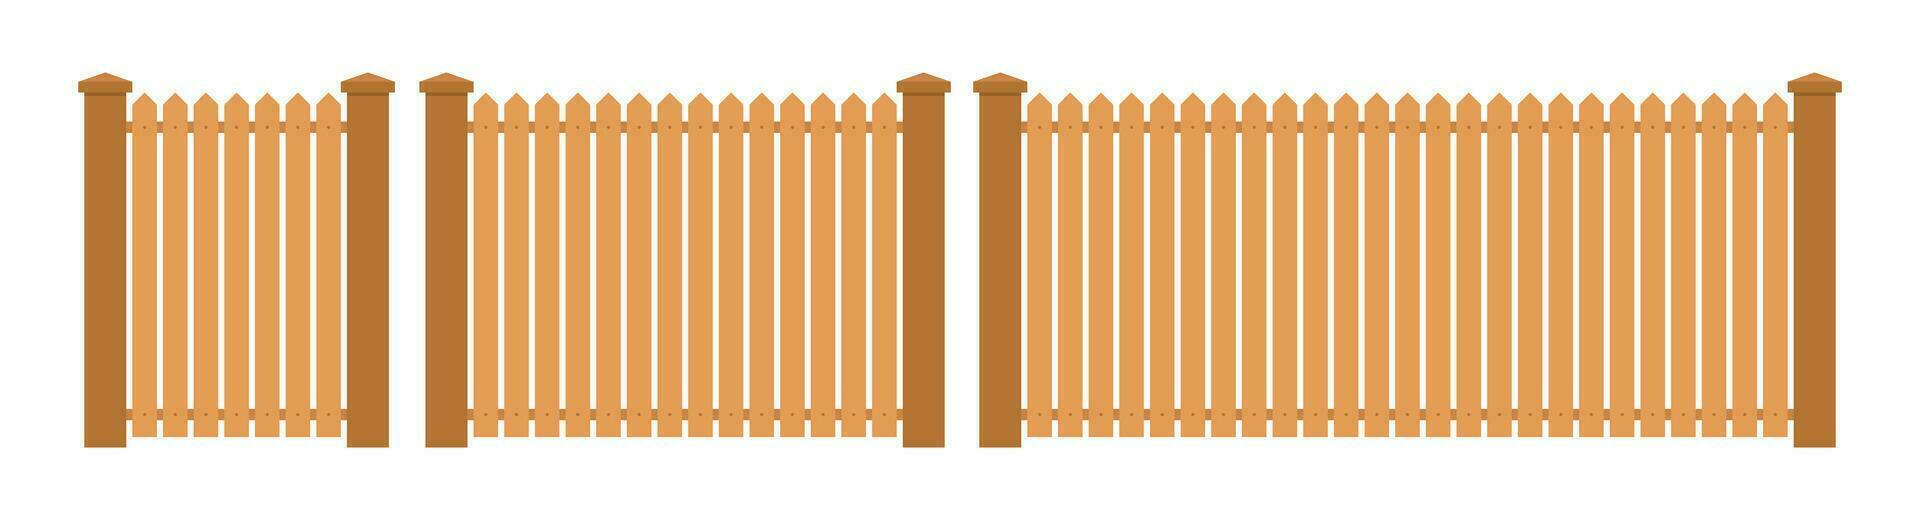 Wooden fence in flat style vector illustration isolated on white